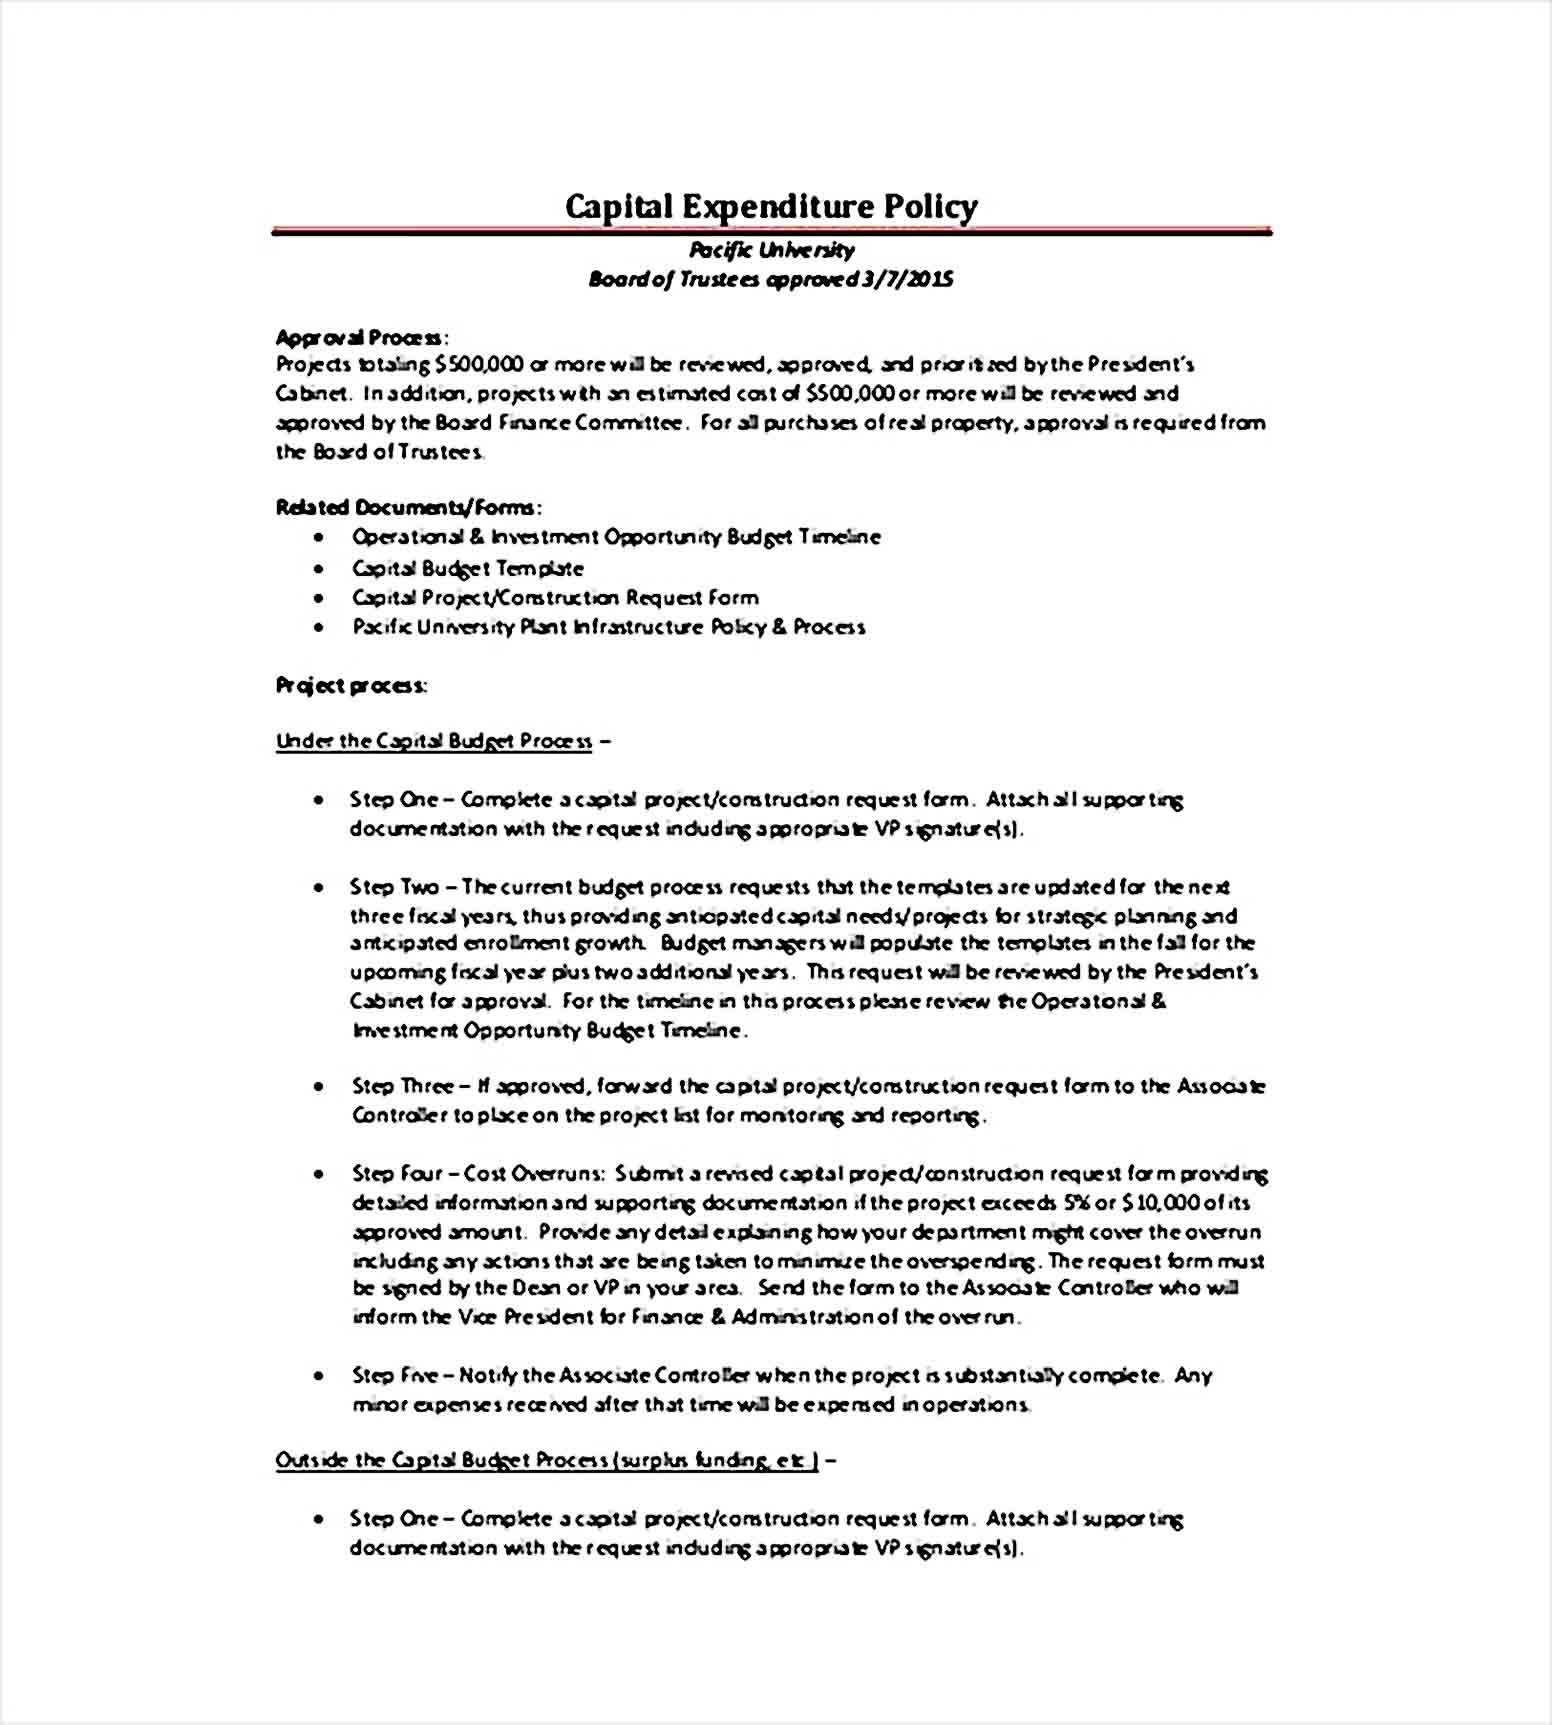 Capital Expenditure Budget Policy PDF